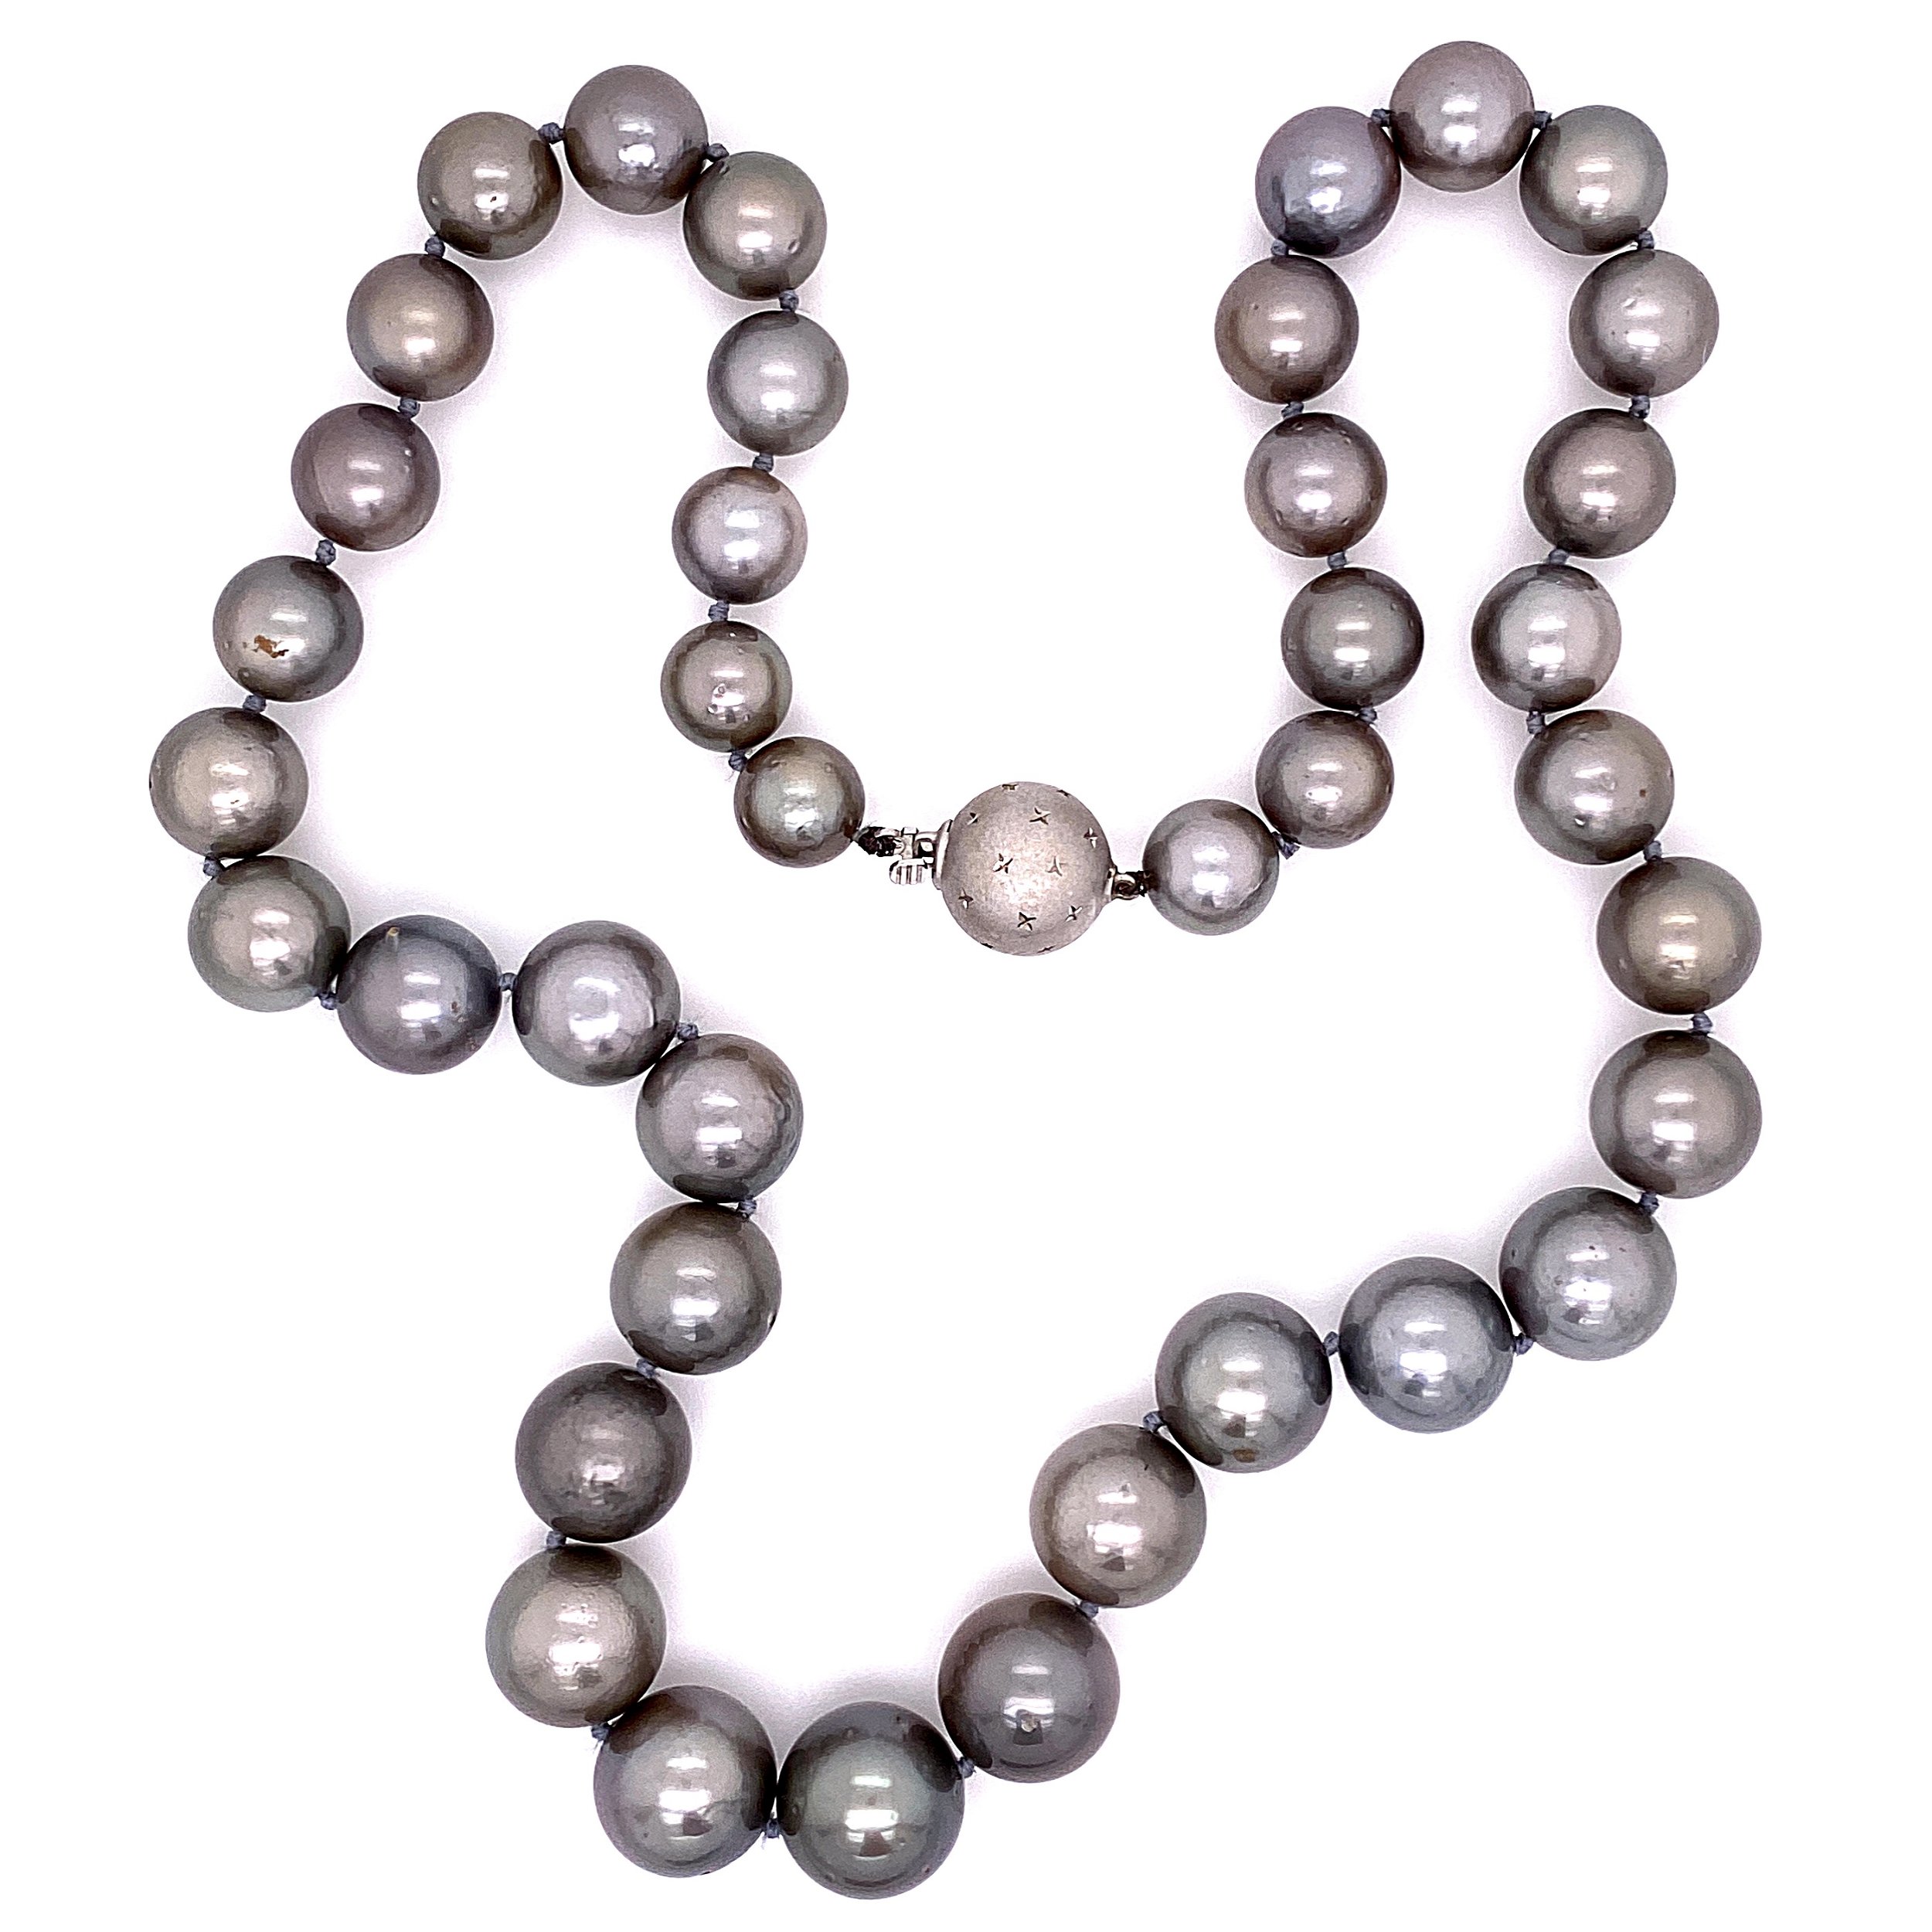 12.75-9.25mm Tahitian South Sea Pearl Graduated Necklace 17.5" long wiht 18K White Gold Clasp 71.2g